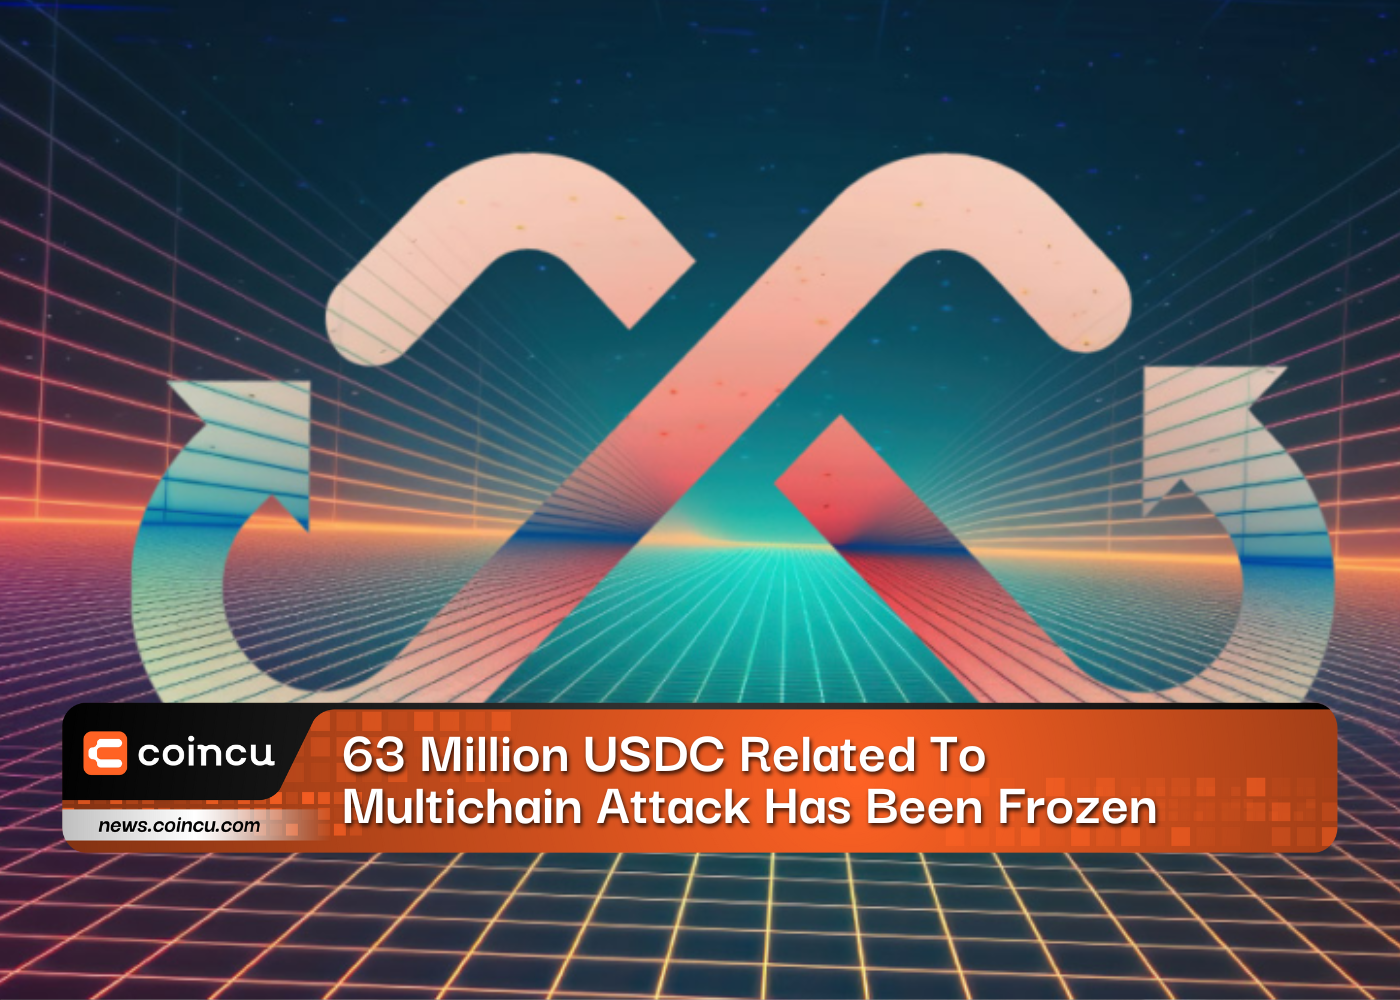 63 Million USDC Related To Multichain Attack Has Been Frozen